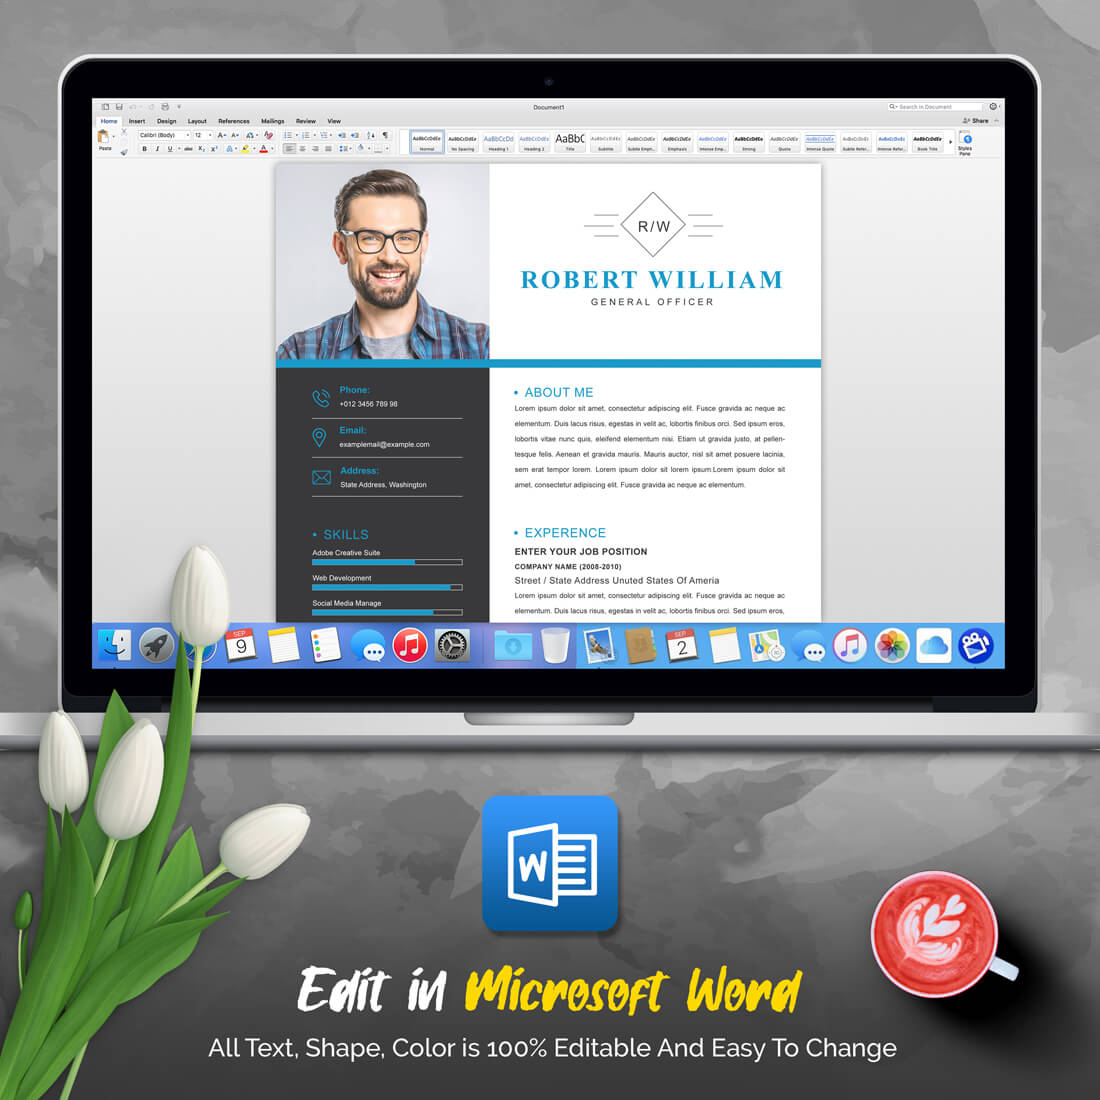 04 4 pages professional ms word aple pages eps photoshop psd resume cv design template design by resume inventor 231